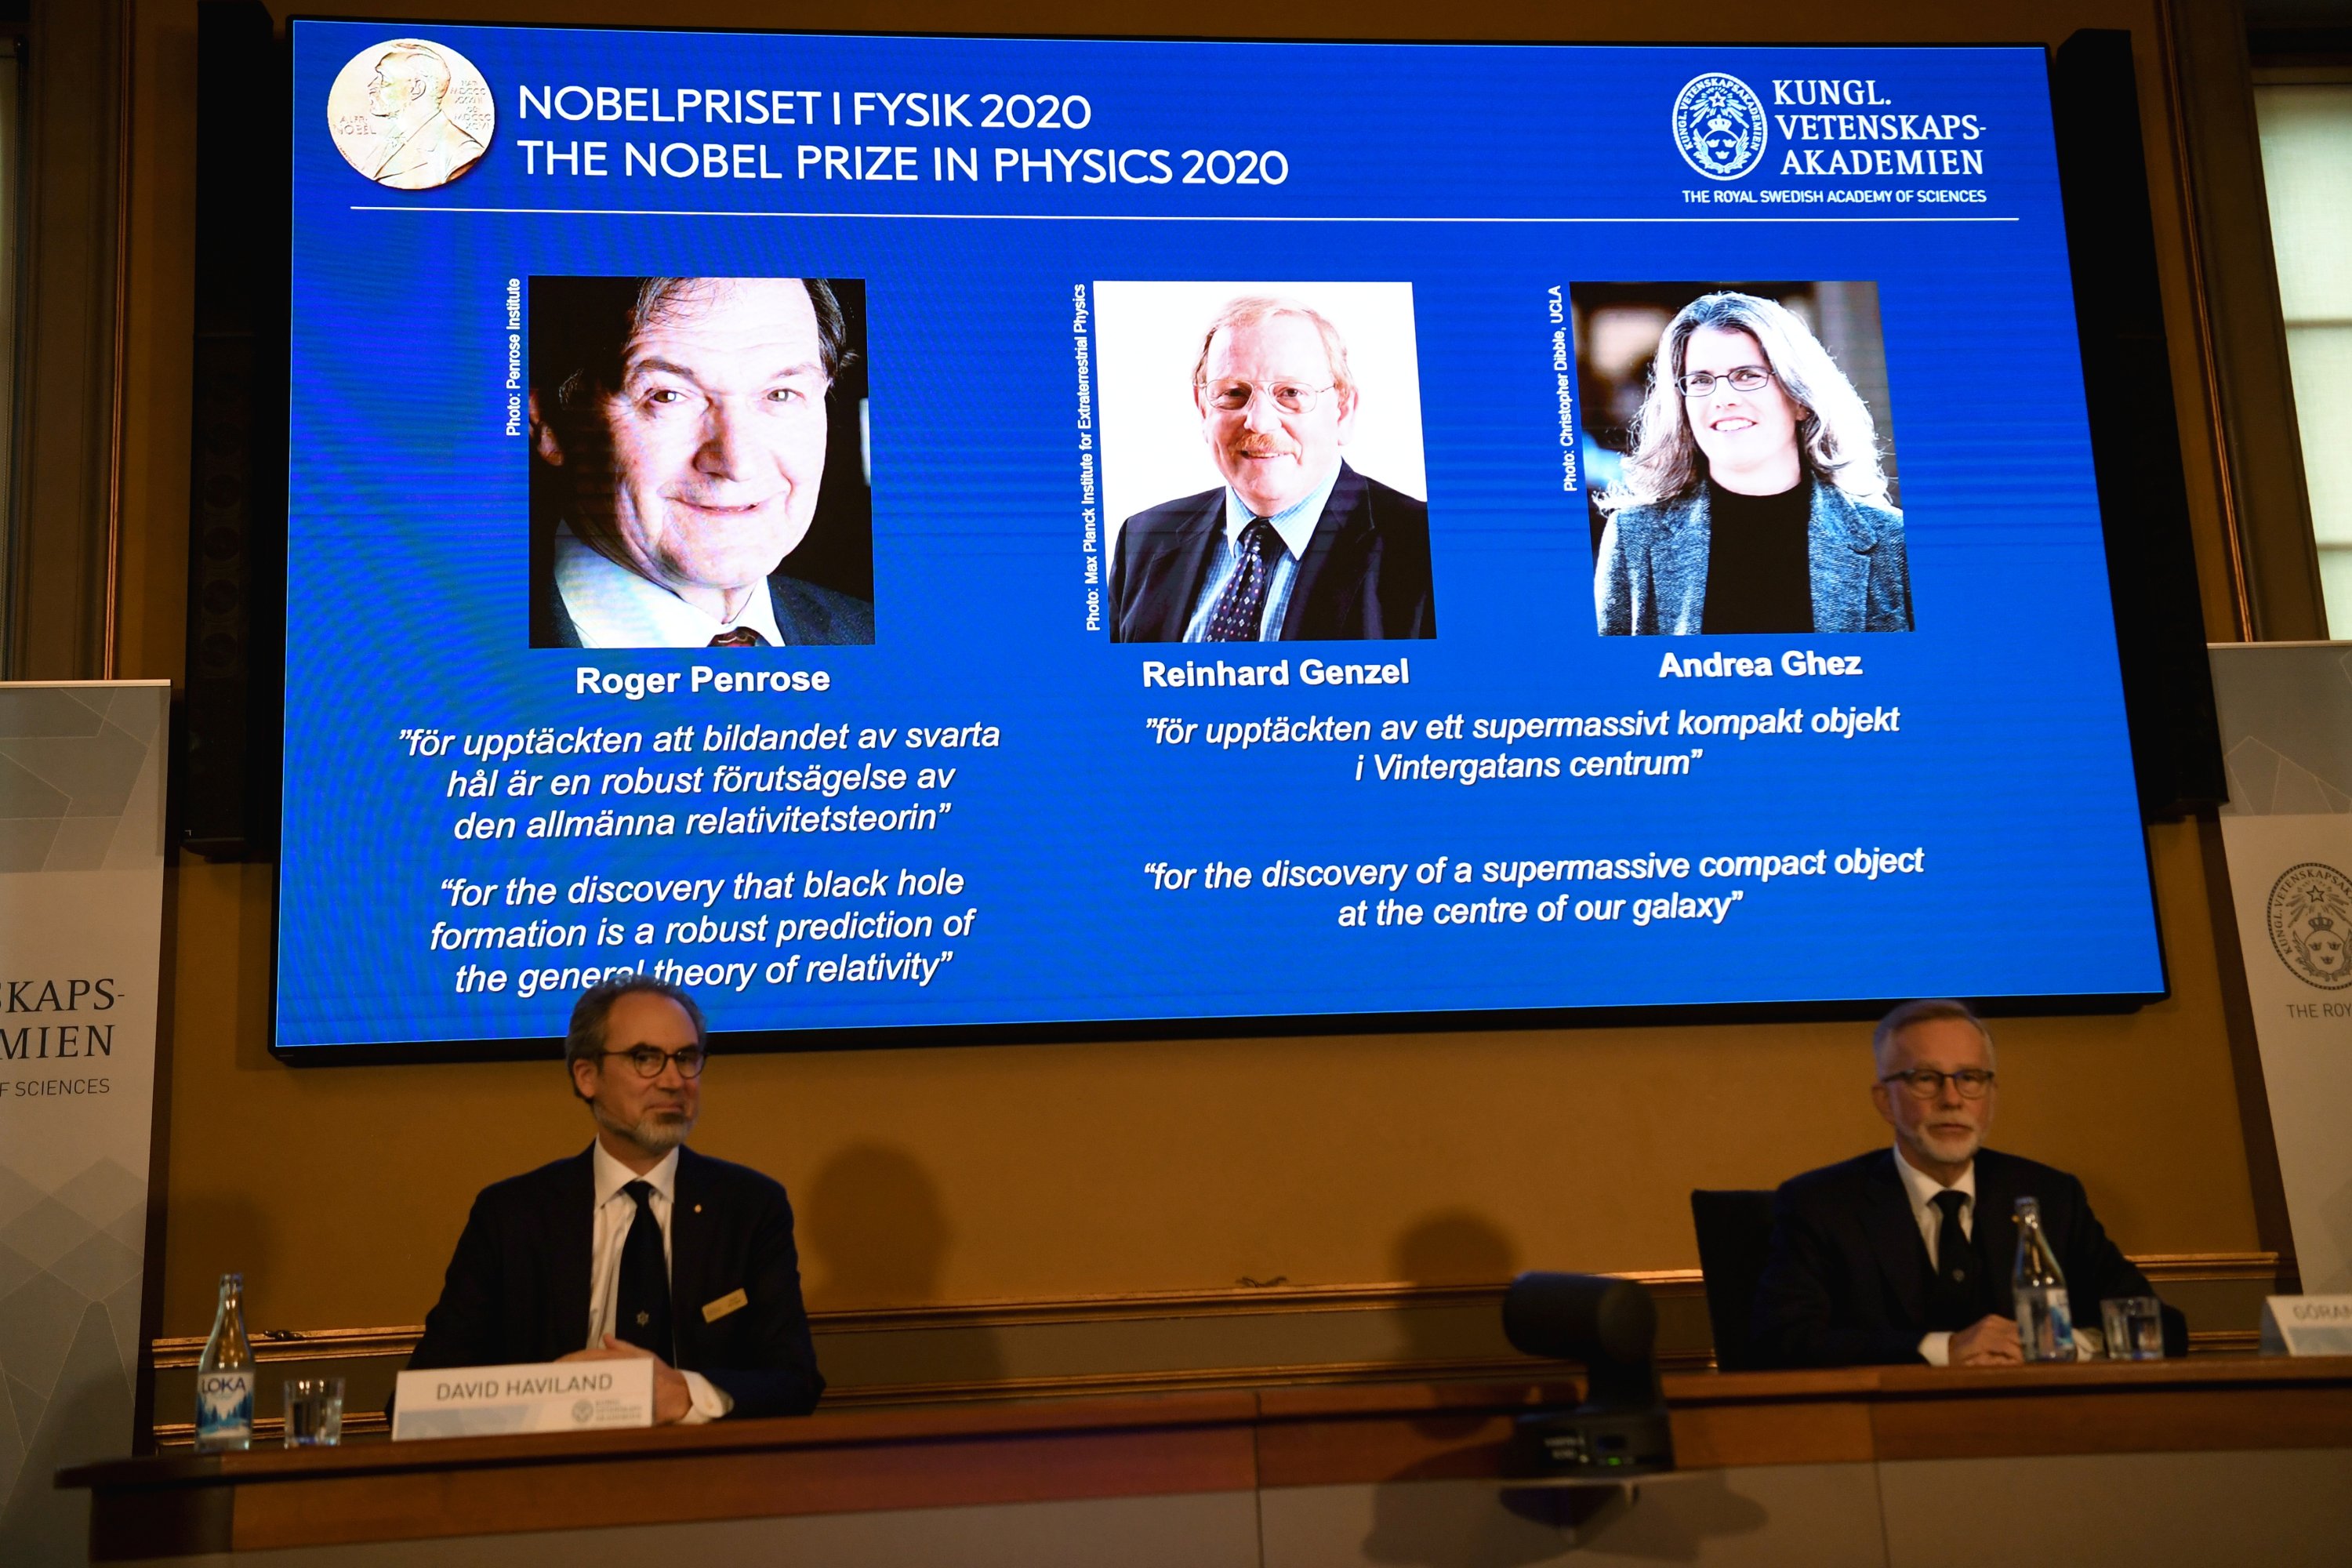 David Haviland, member of the Nobel Committee for Physics, left, and Secretary General of the Royal Swedish Academy of Sciences Goran K. Hansson announce the winners of the 2020 Nobel Prize in Physics during a news conference at the Royal Swedish Academy of Sciences, in Stockholm, Sweden, Oct. 6, 2020. (TT News Agency via Reuters)